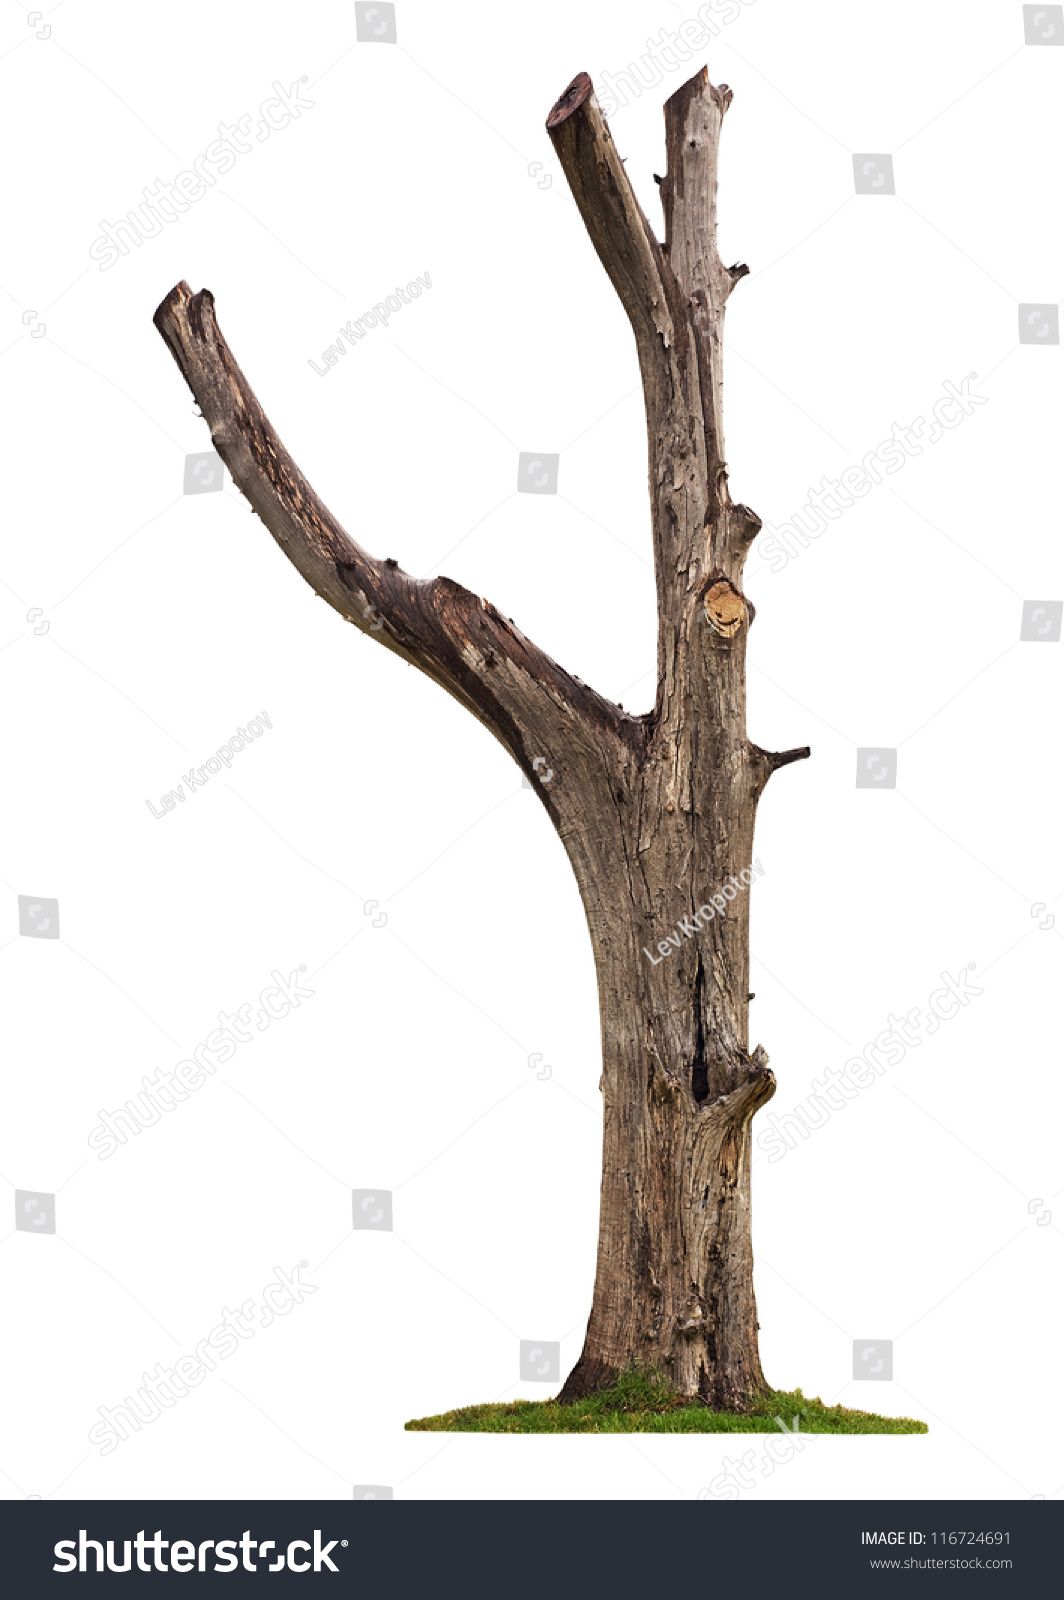 Single old and dead tree isolated on white background #116724691